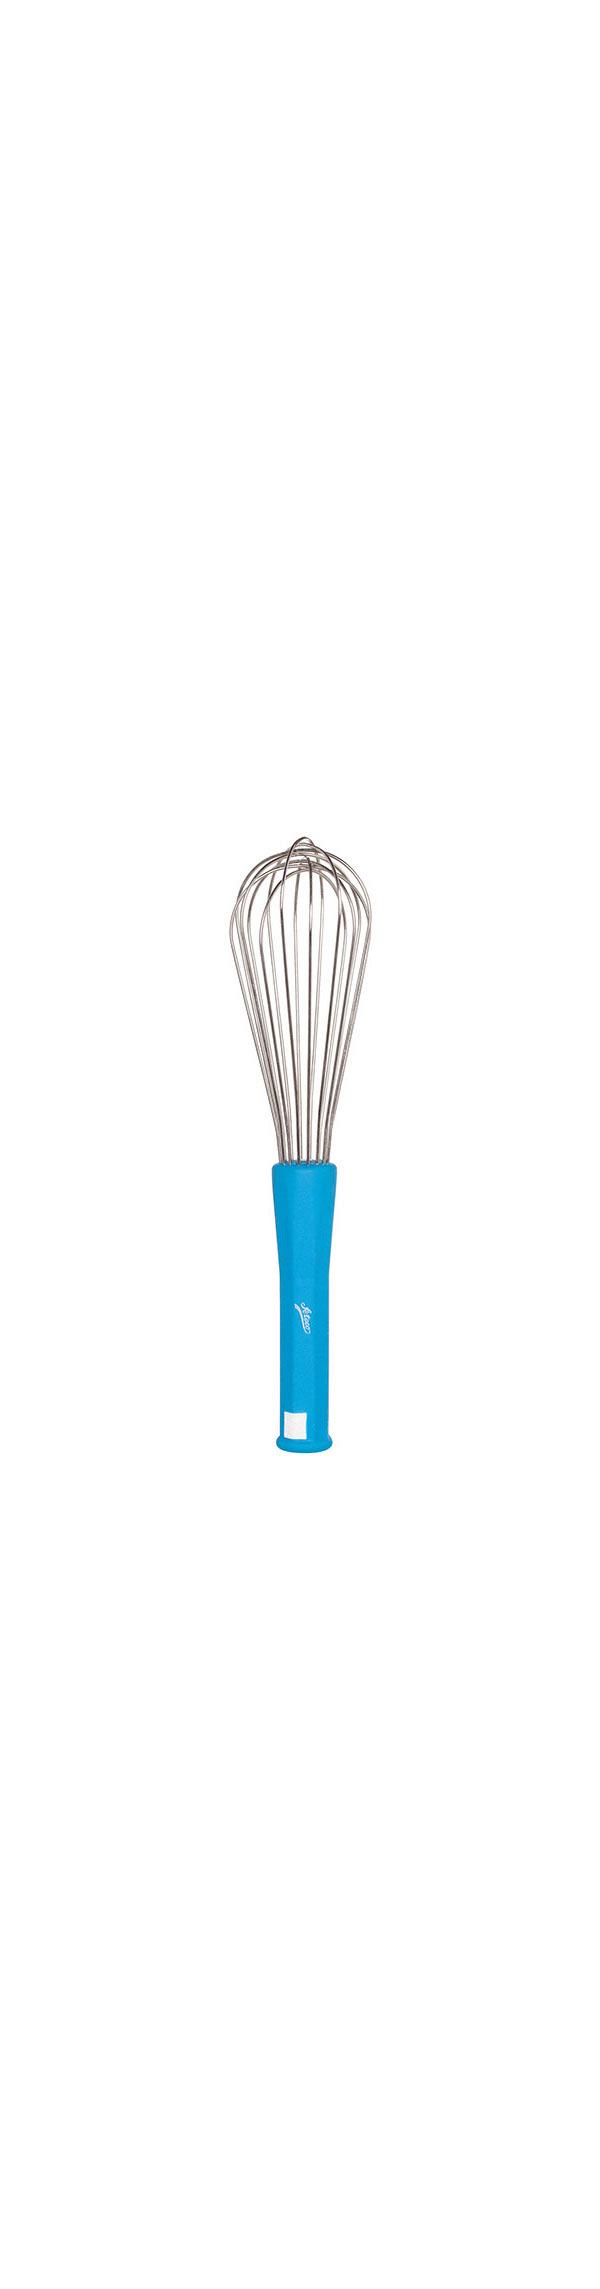 25cm Whisk by Ateco 600